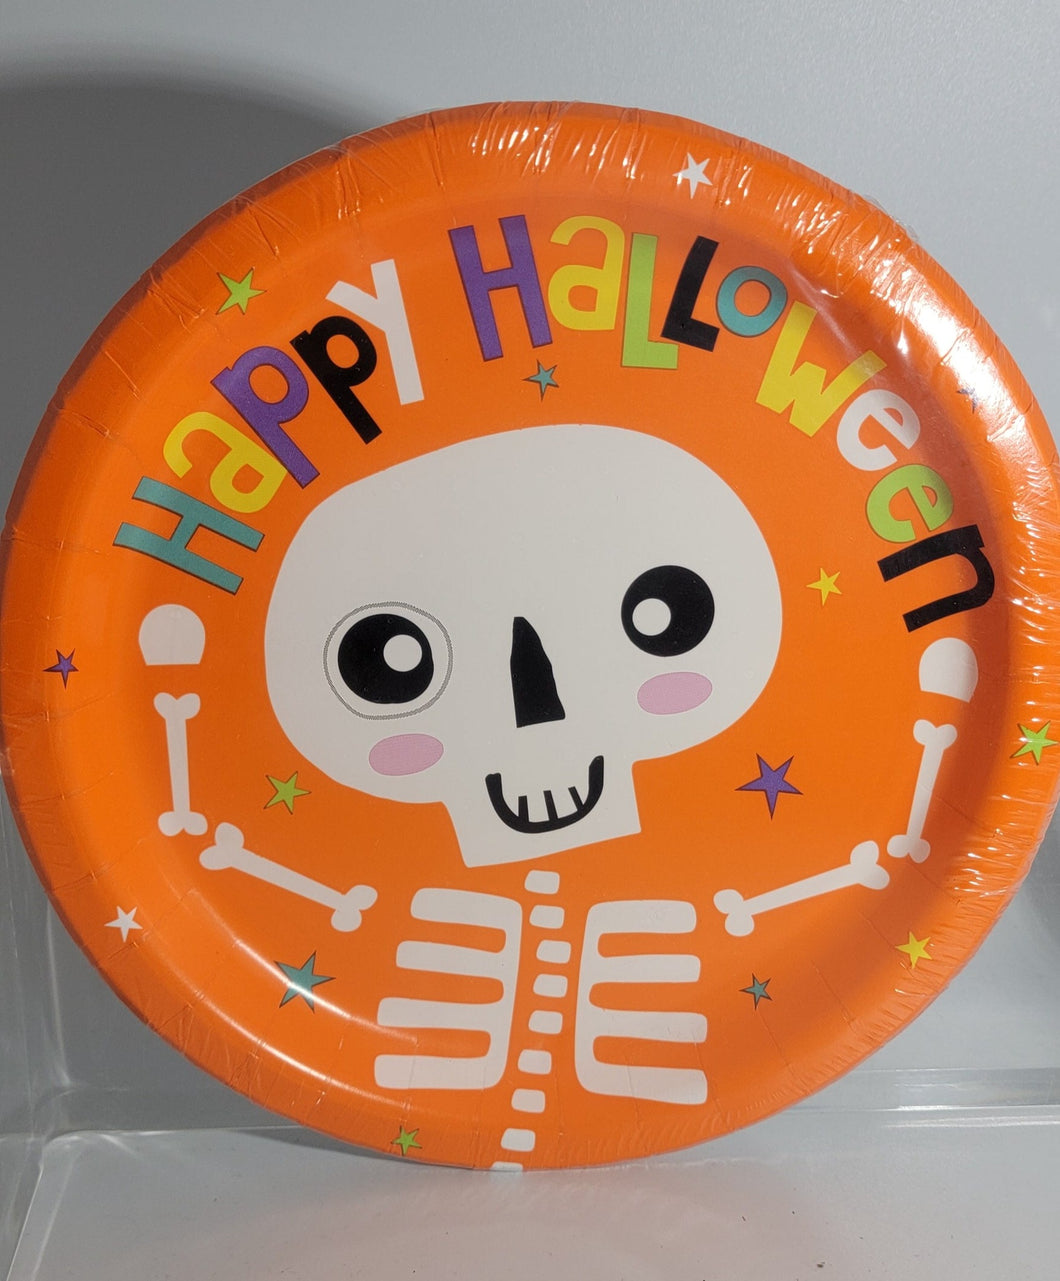 Halloween 8.6 inch Orange Party Plates, 8-pack with Happy Halloween and Skeleton